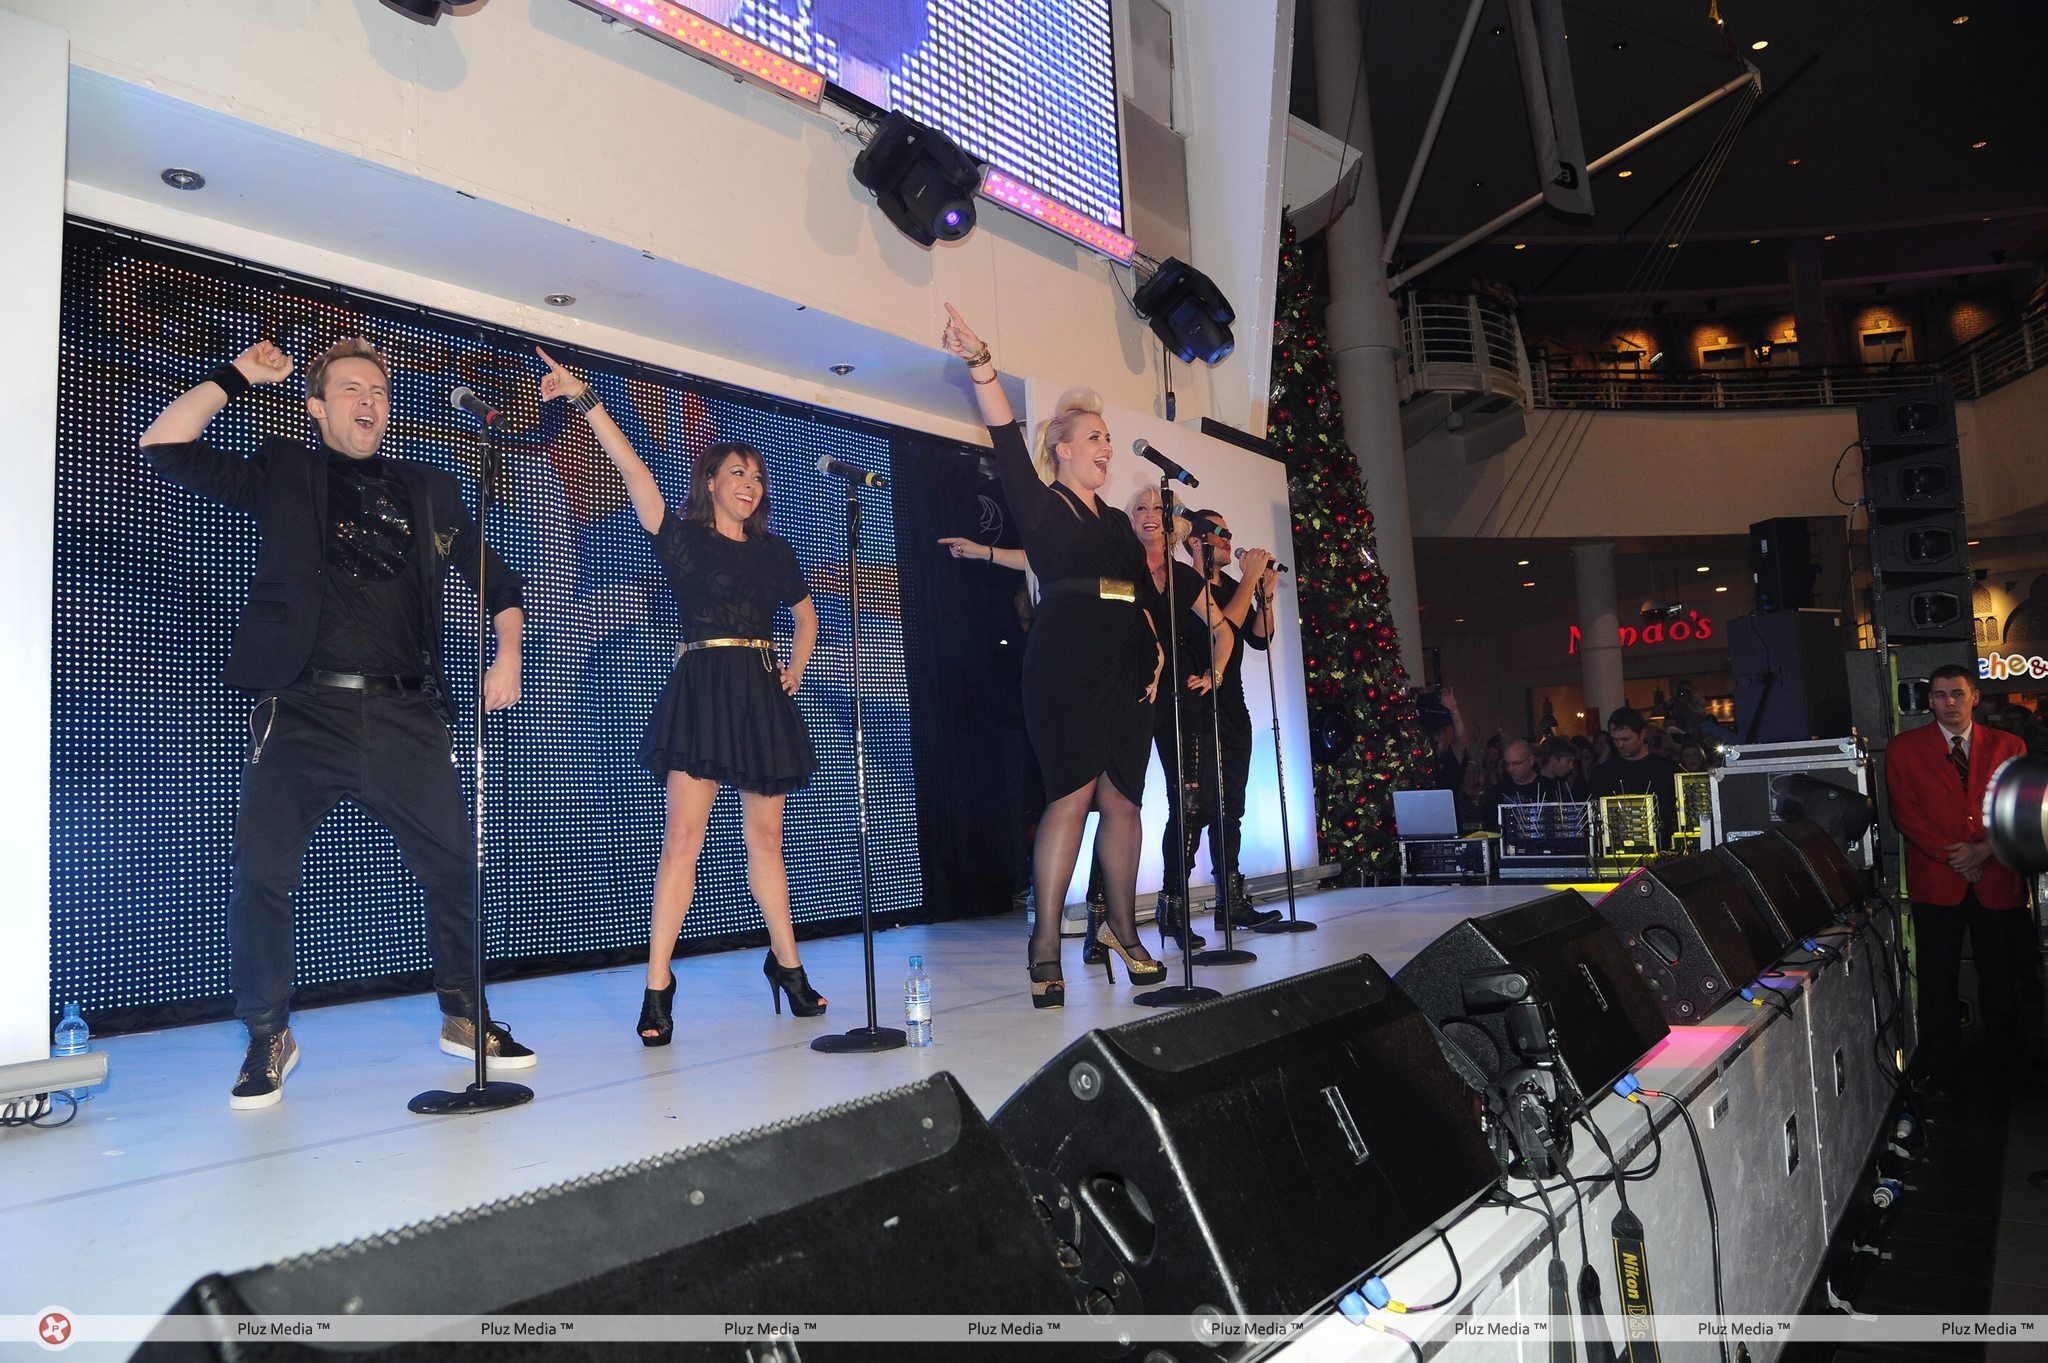 Steps' performs live at the Trafford centre in Manchester | Picture 111521